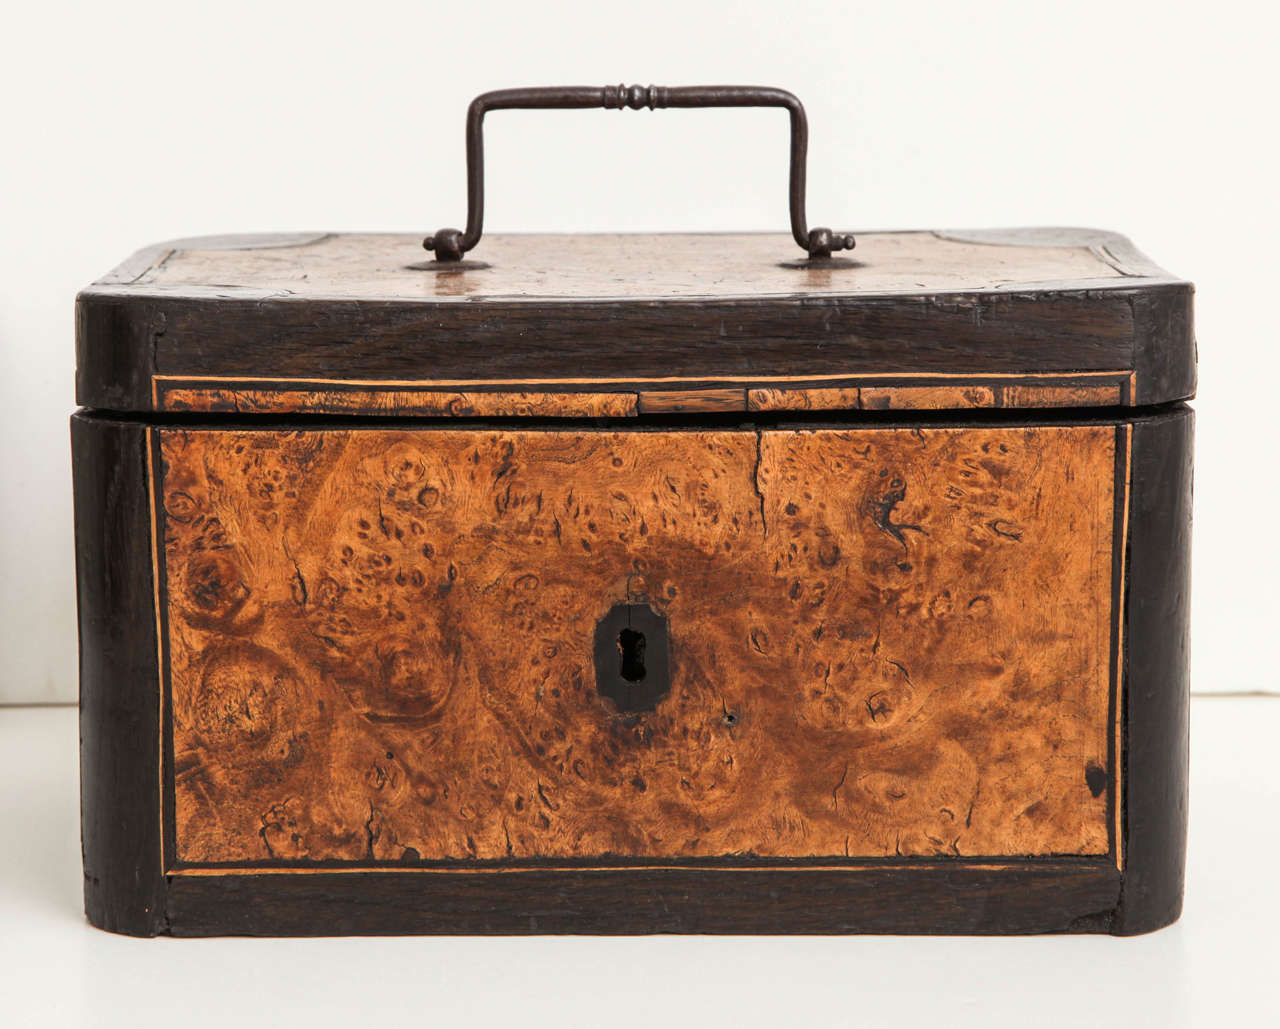 A mid-18th century English bog oak box with richly figured contrasting burr walnut panels and a steel carrying handle, circa 1750.